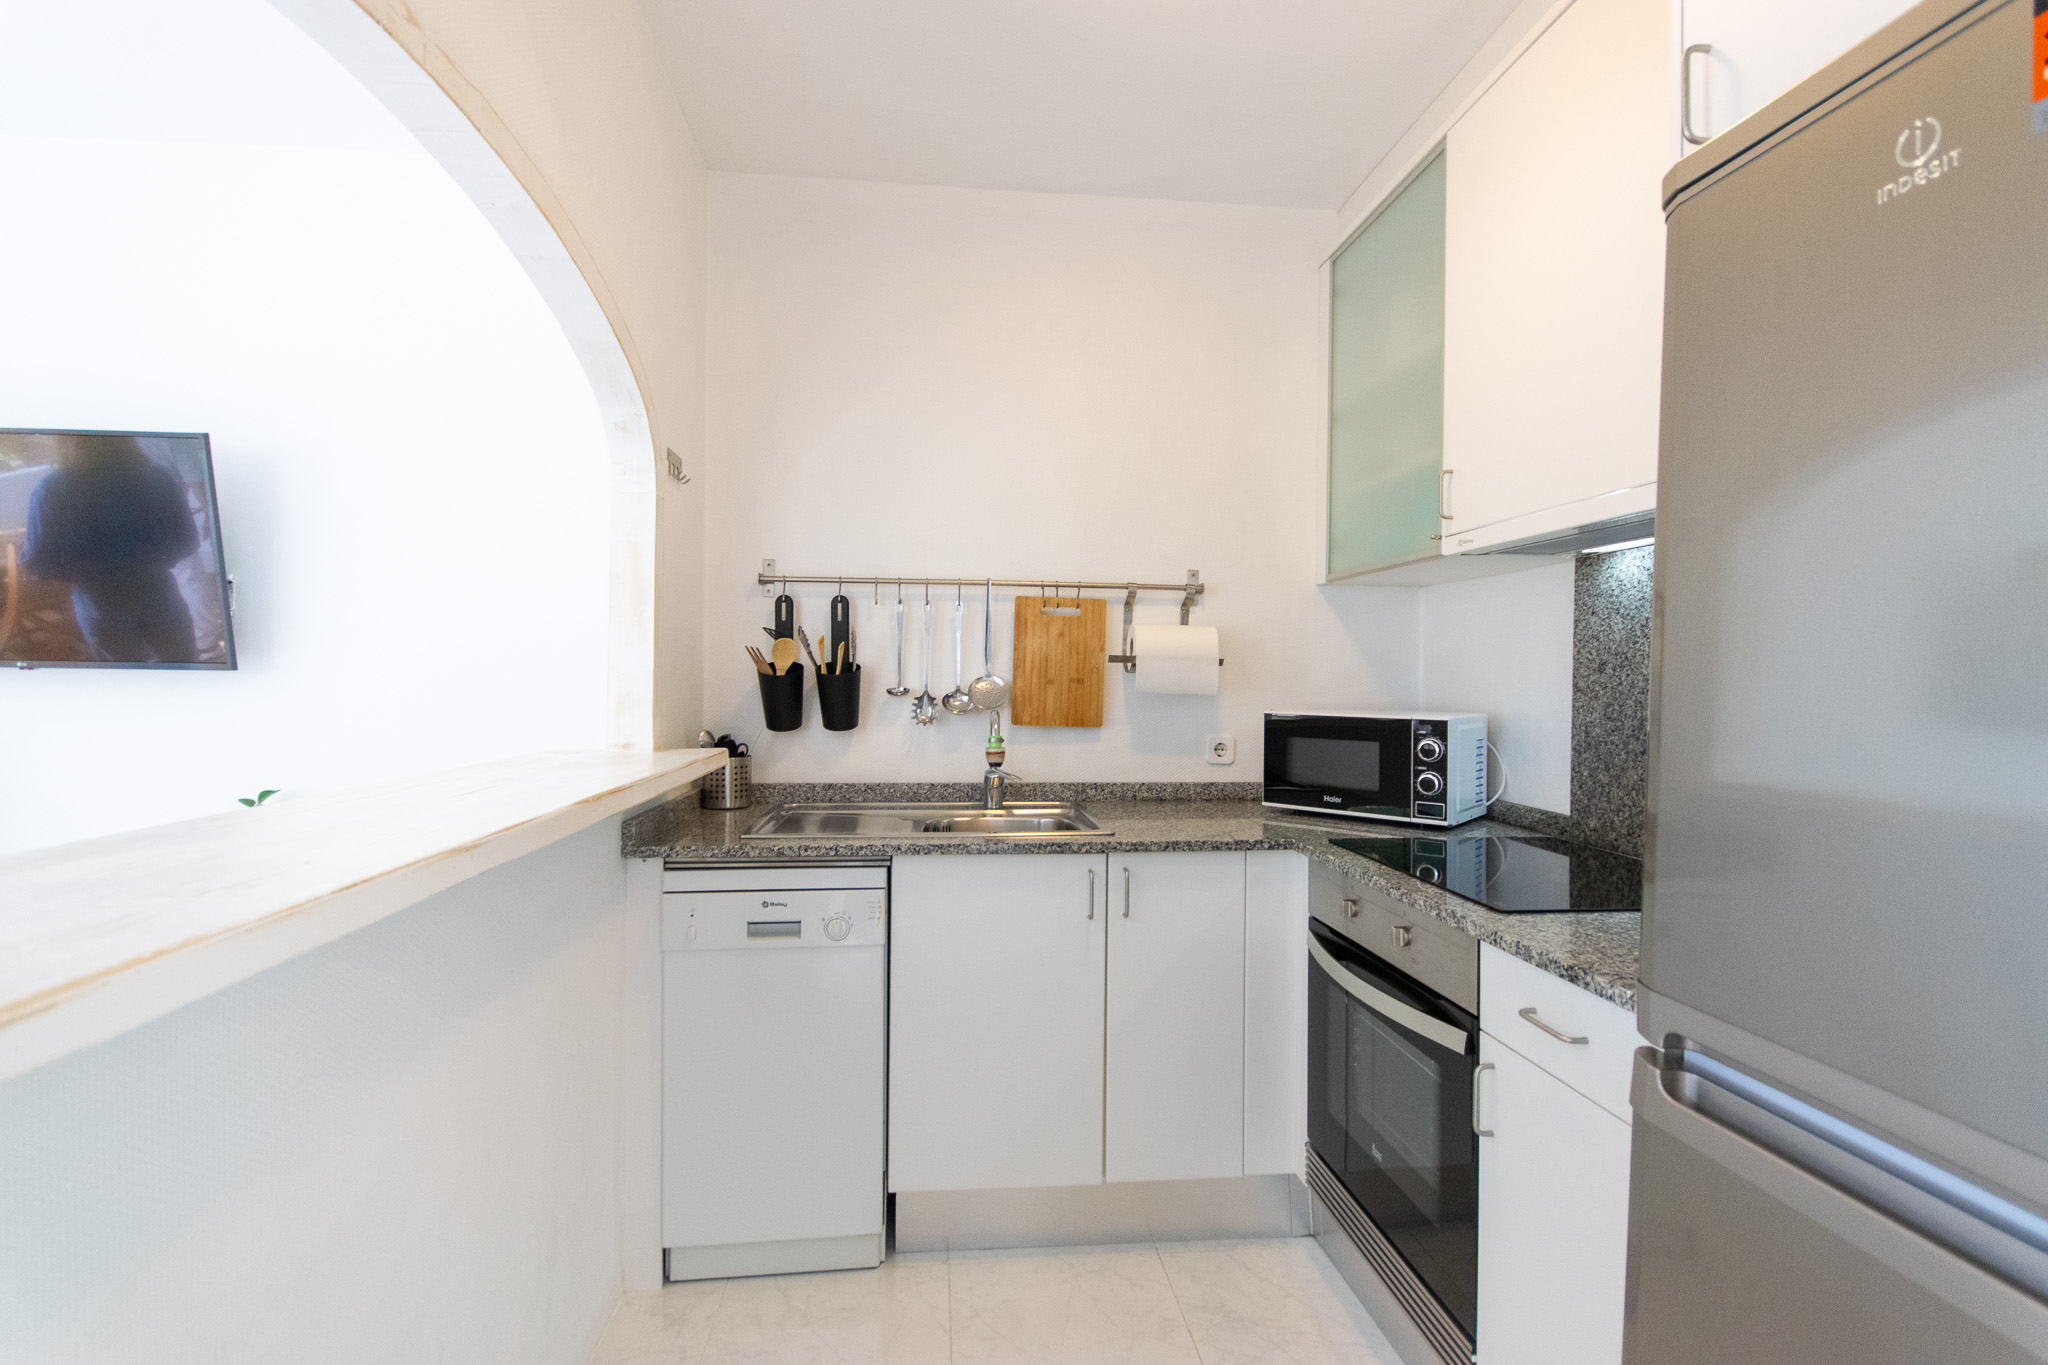 Kitchen of a beautiful renovated flat in Son Parc